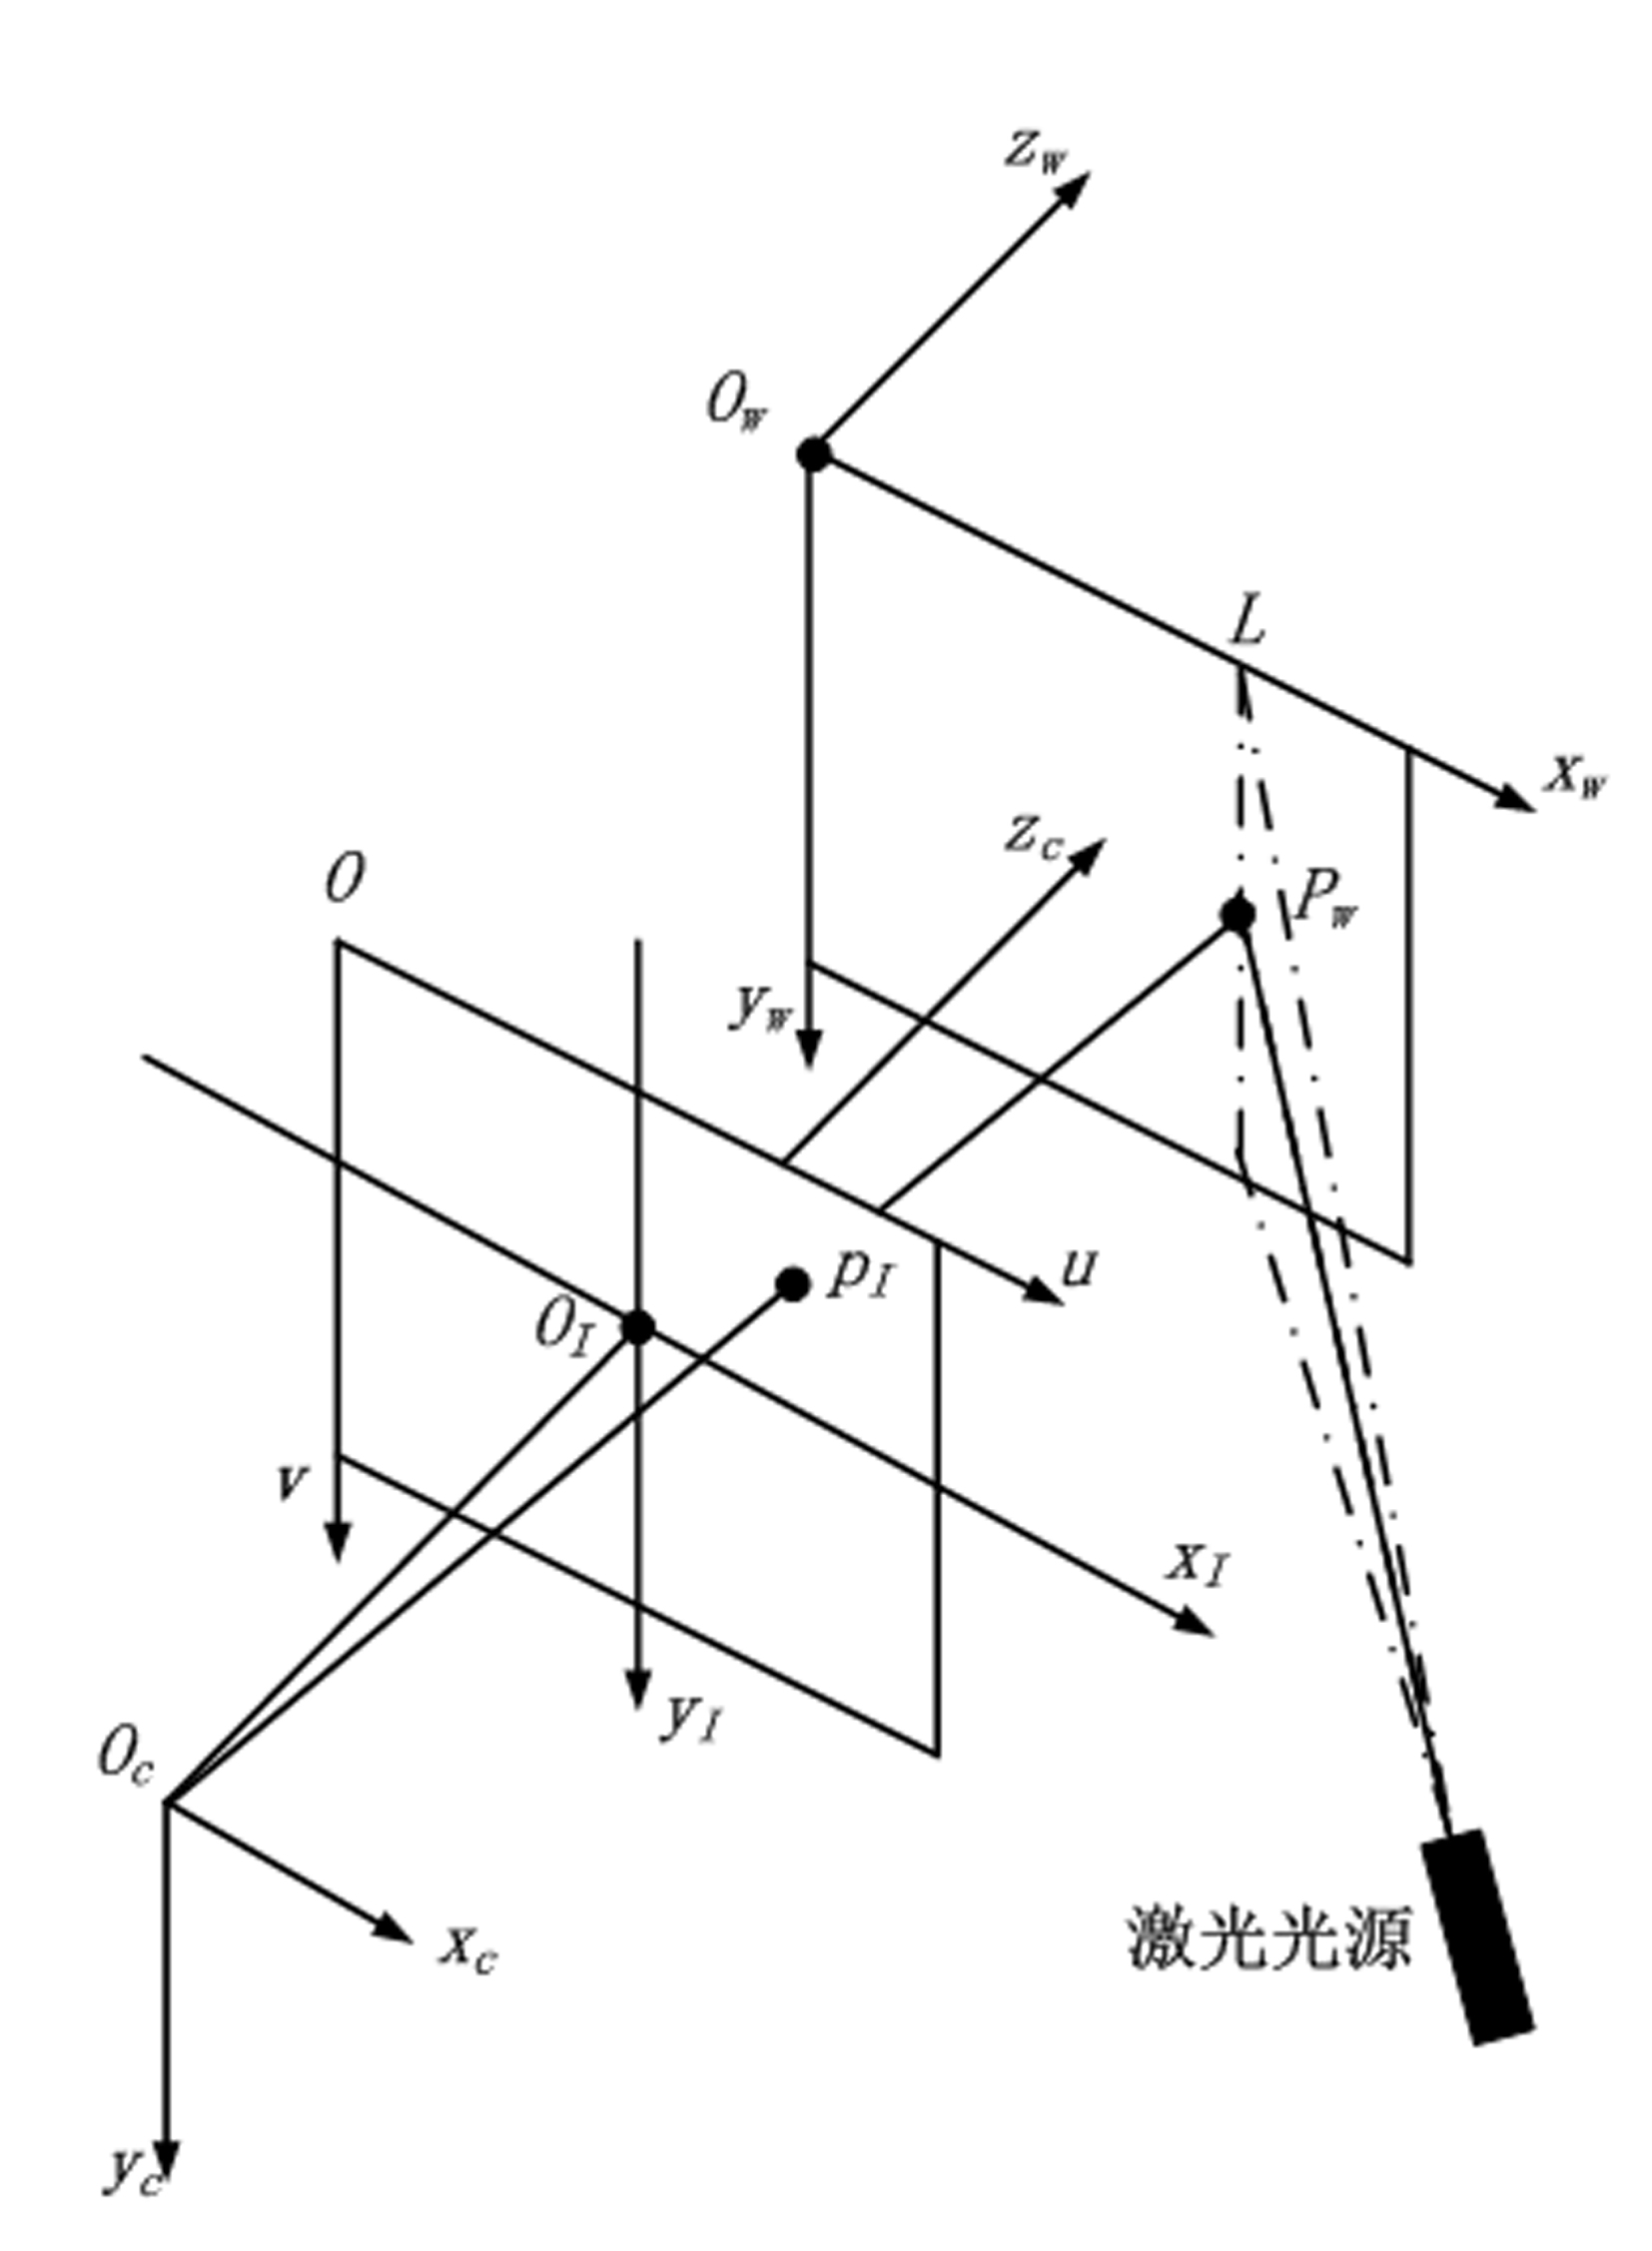 Measuring method for non-contact steel rail sagging surface